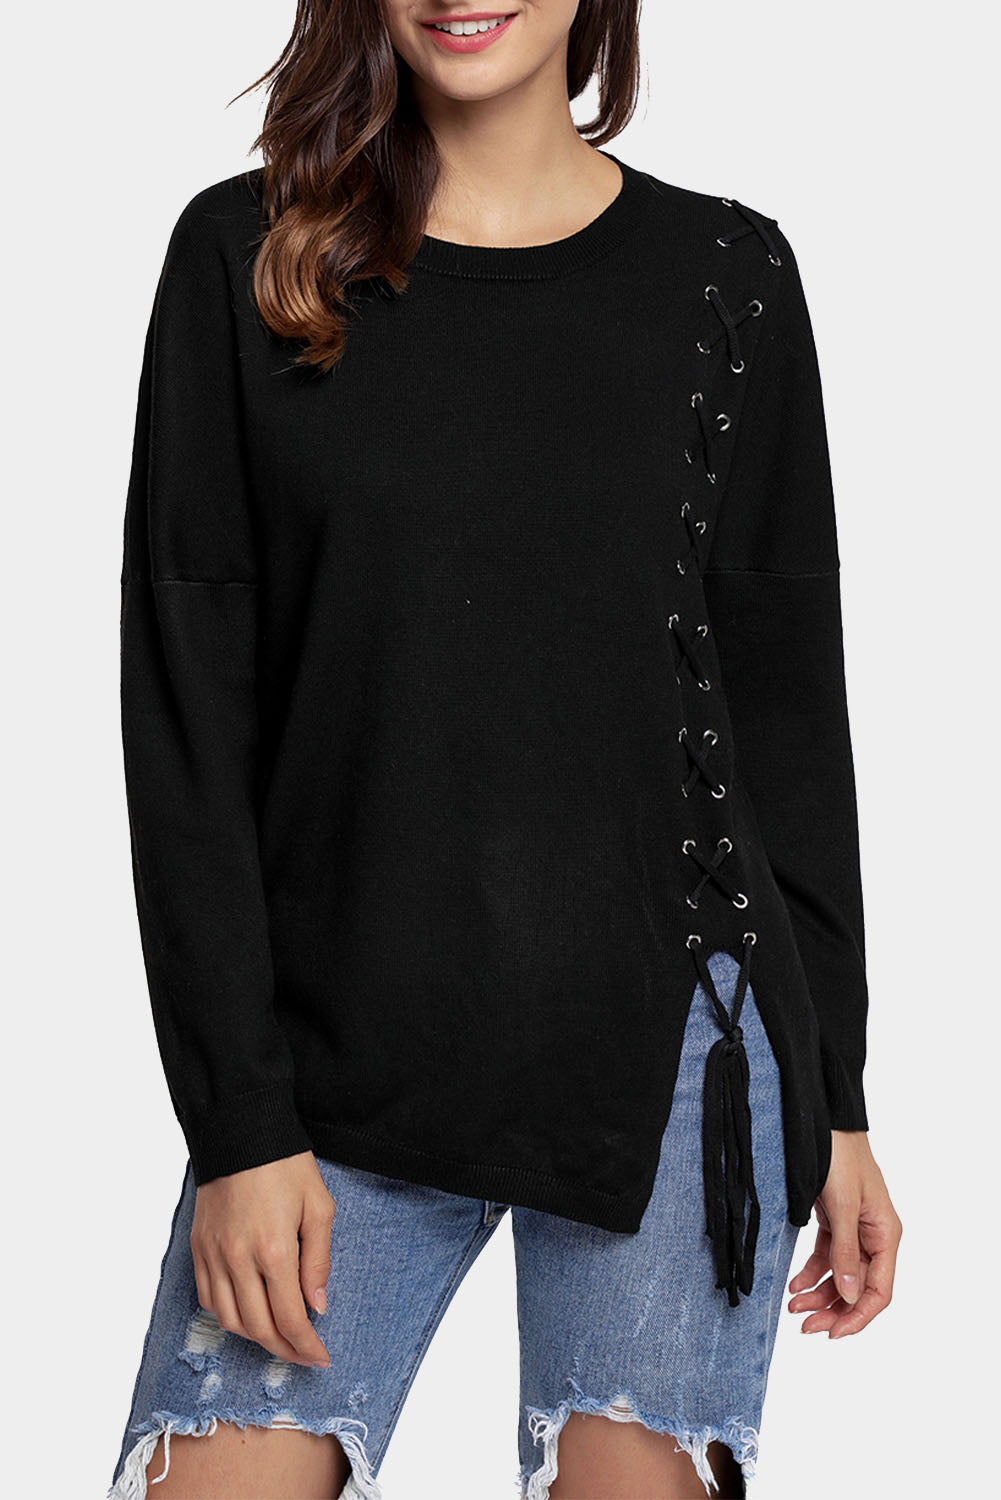 Black Lace up Sweater